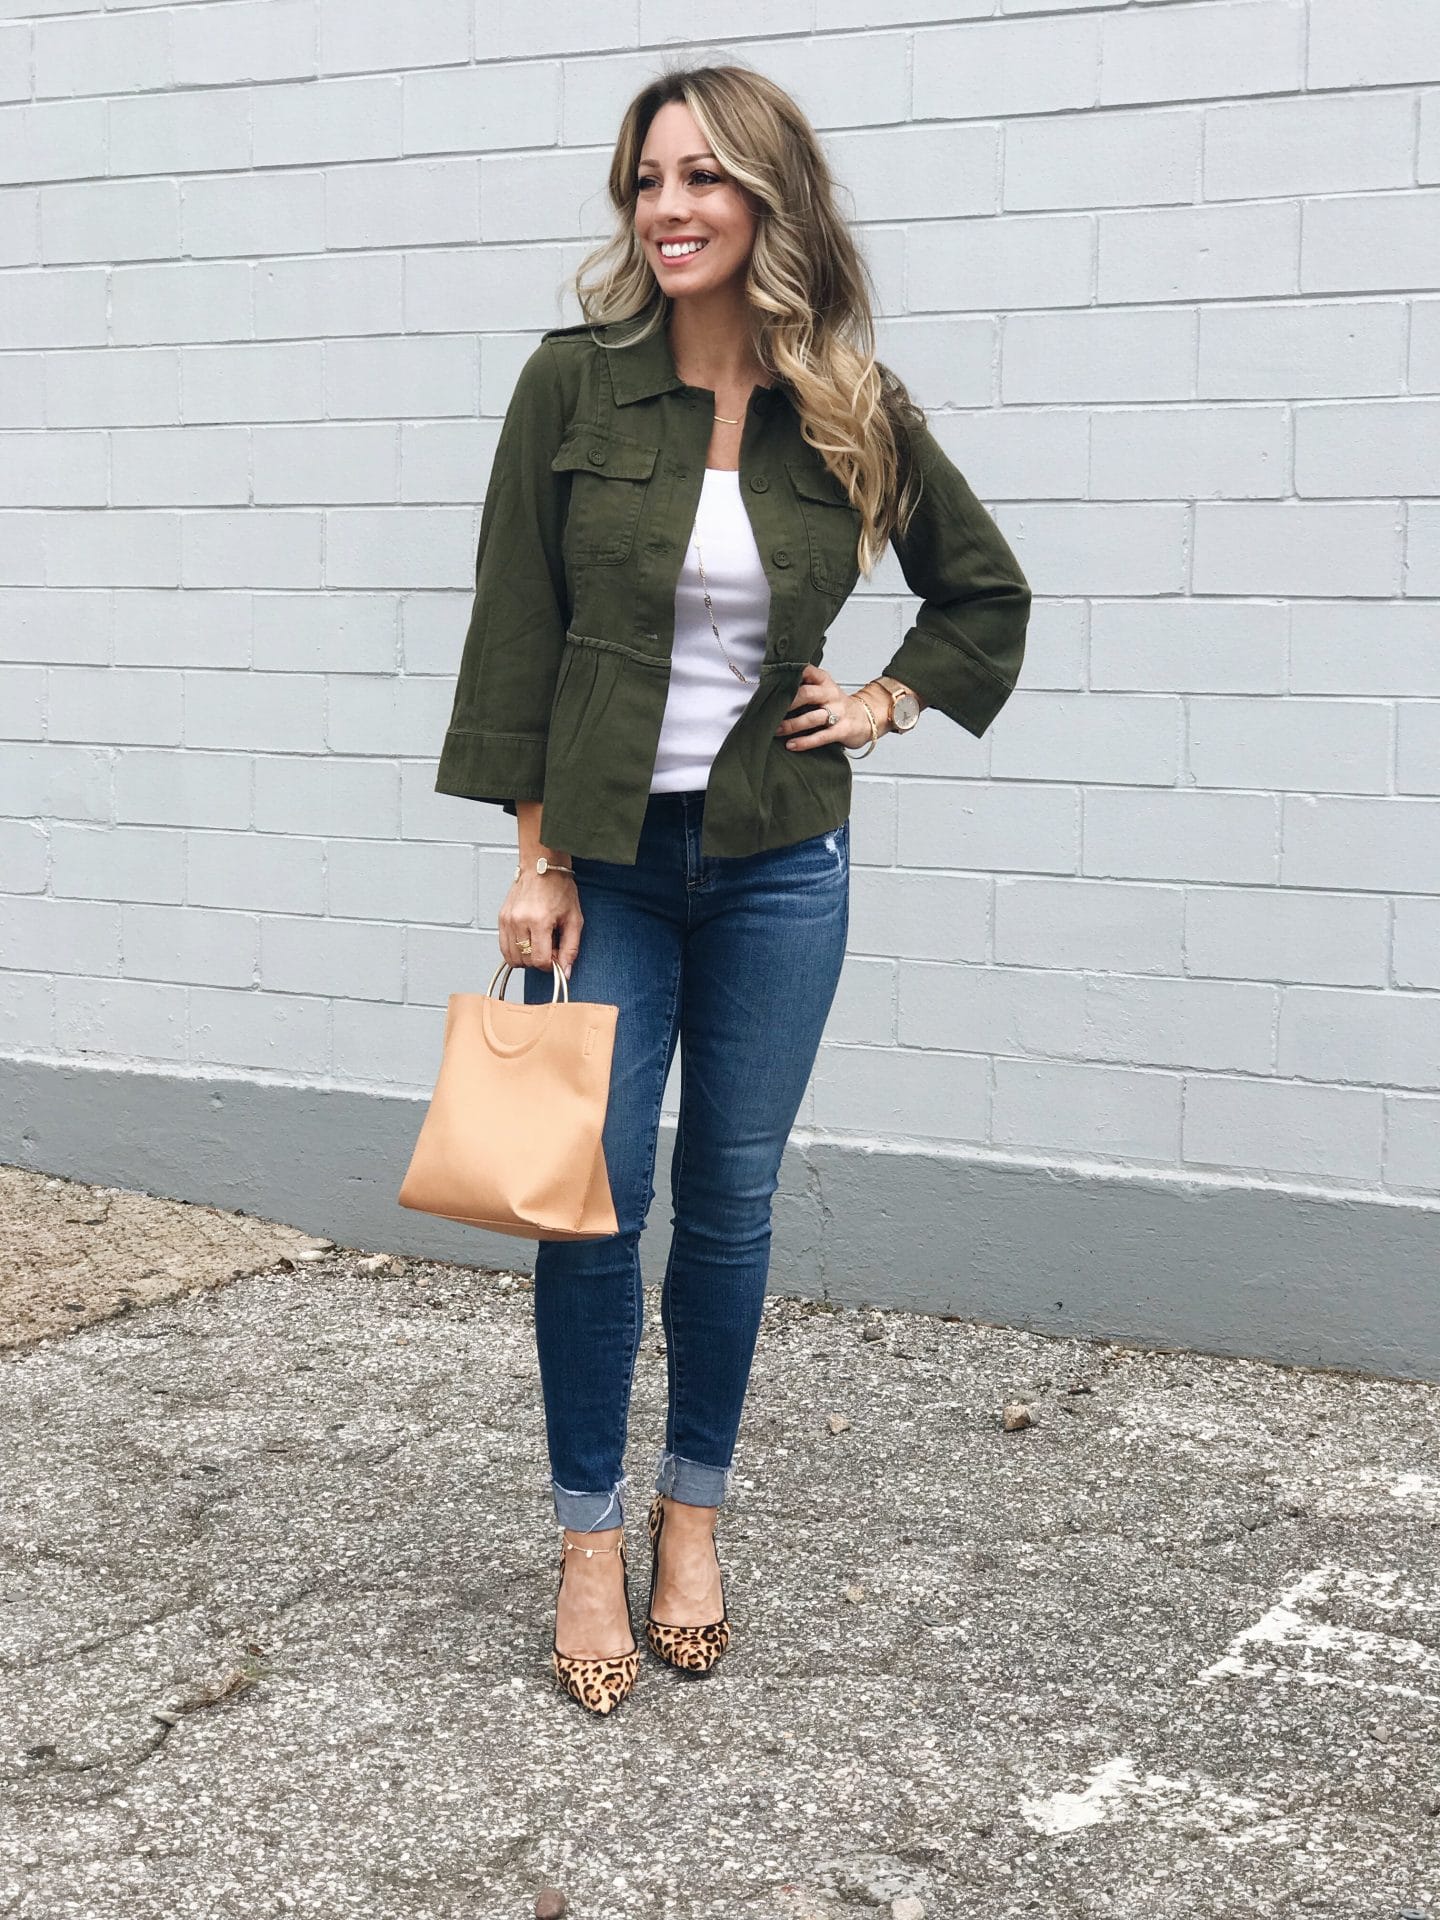 Spring Casual Outfit - skinny jeans, military jacket and leopard heels